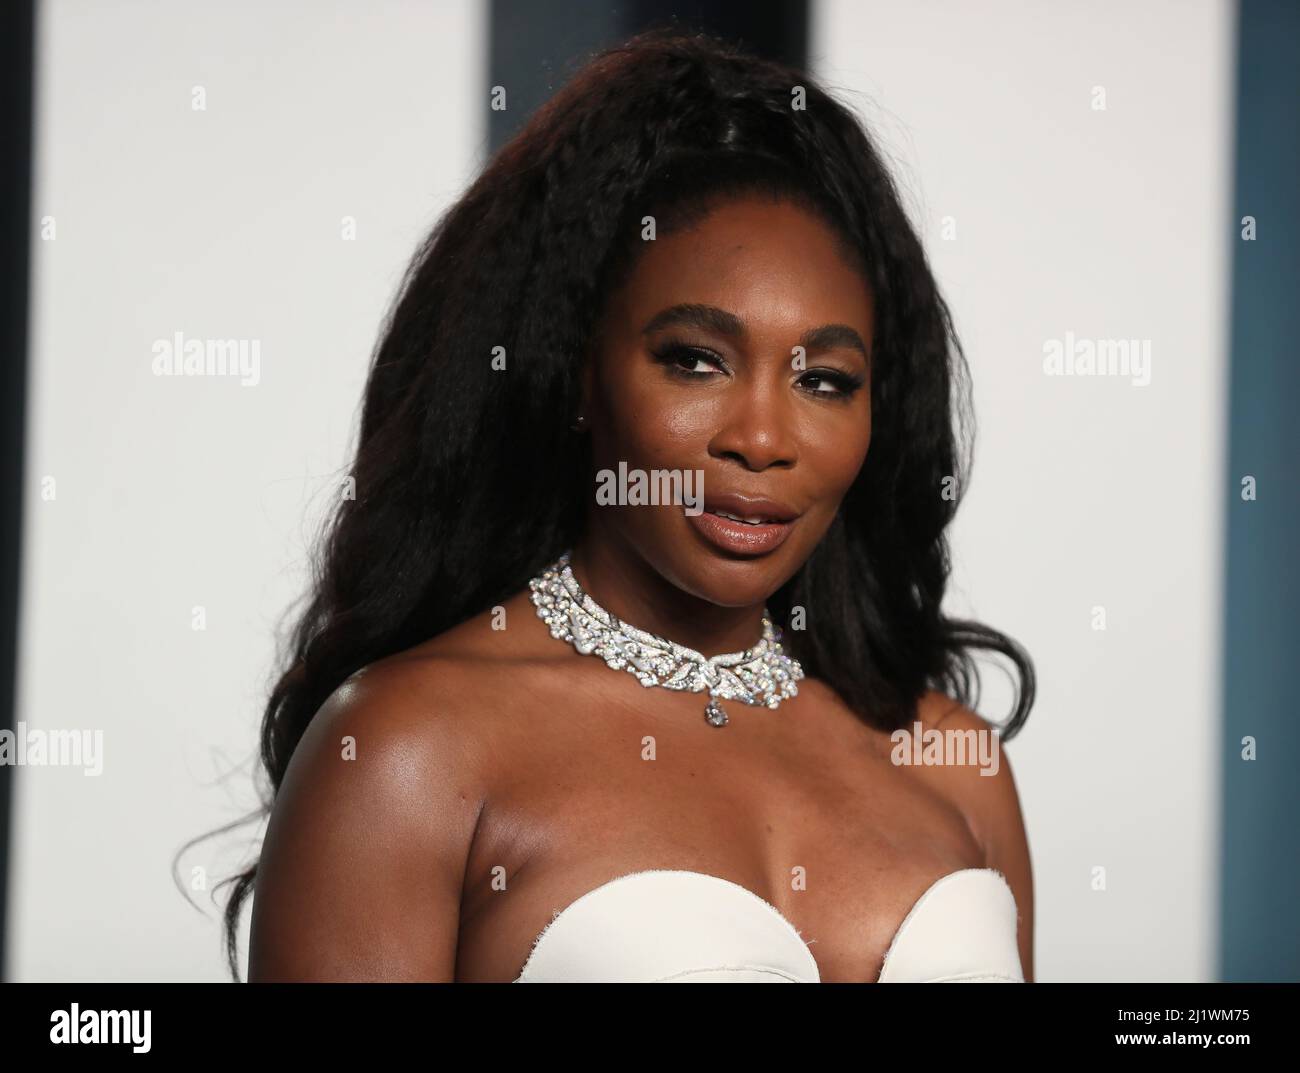 Venus Williams arrives at the Vanity Fair Oscar party during the 94th Academy Awards in Beverly Hills, California, U.S., March 27, 2022.   REUTERS/Danny Moloshok Stock Photo